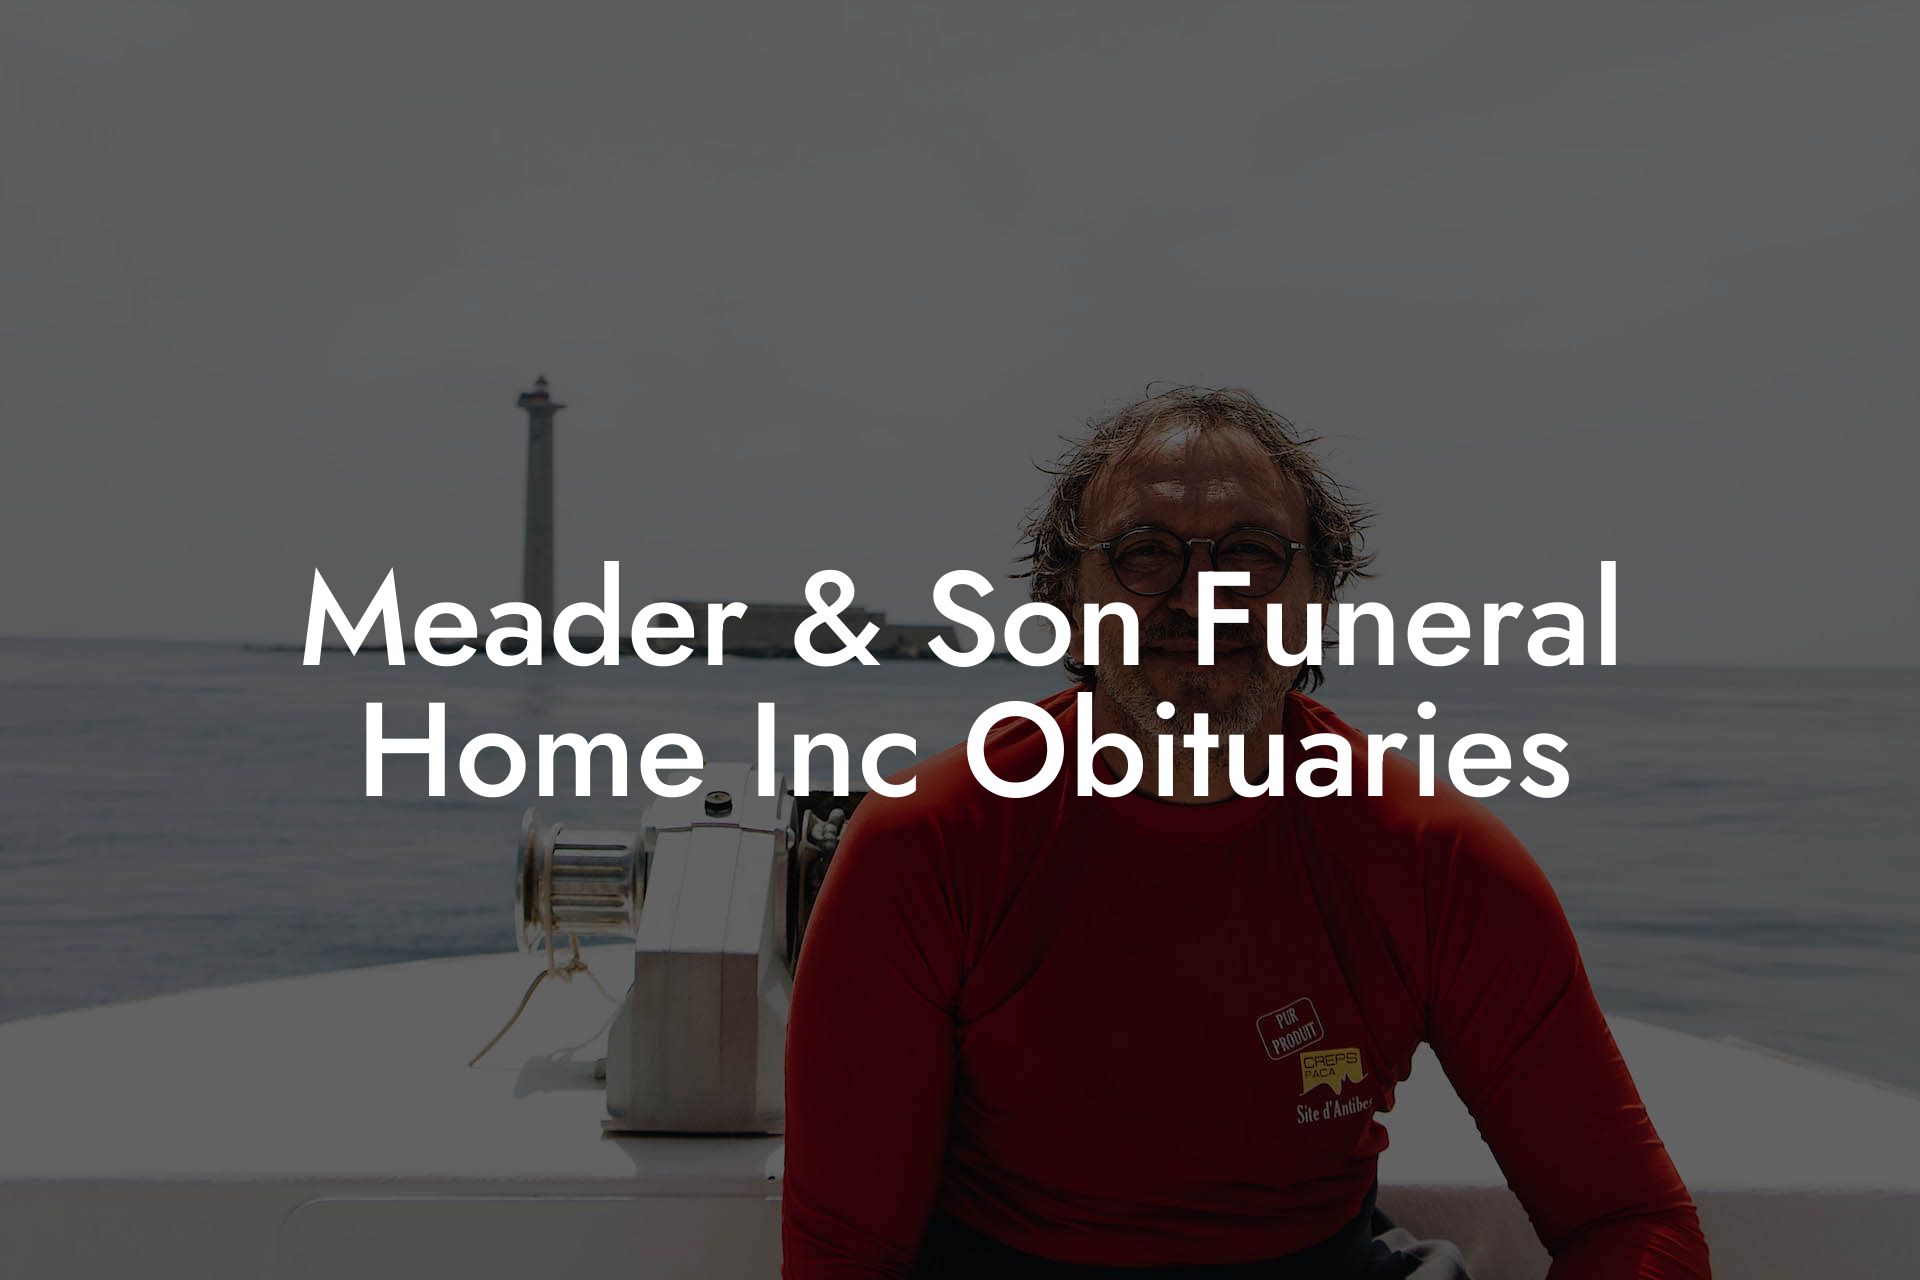 Meader & Son Funeral Home Inc Obituaries